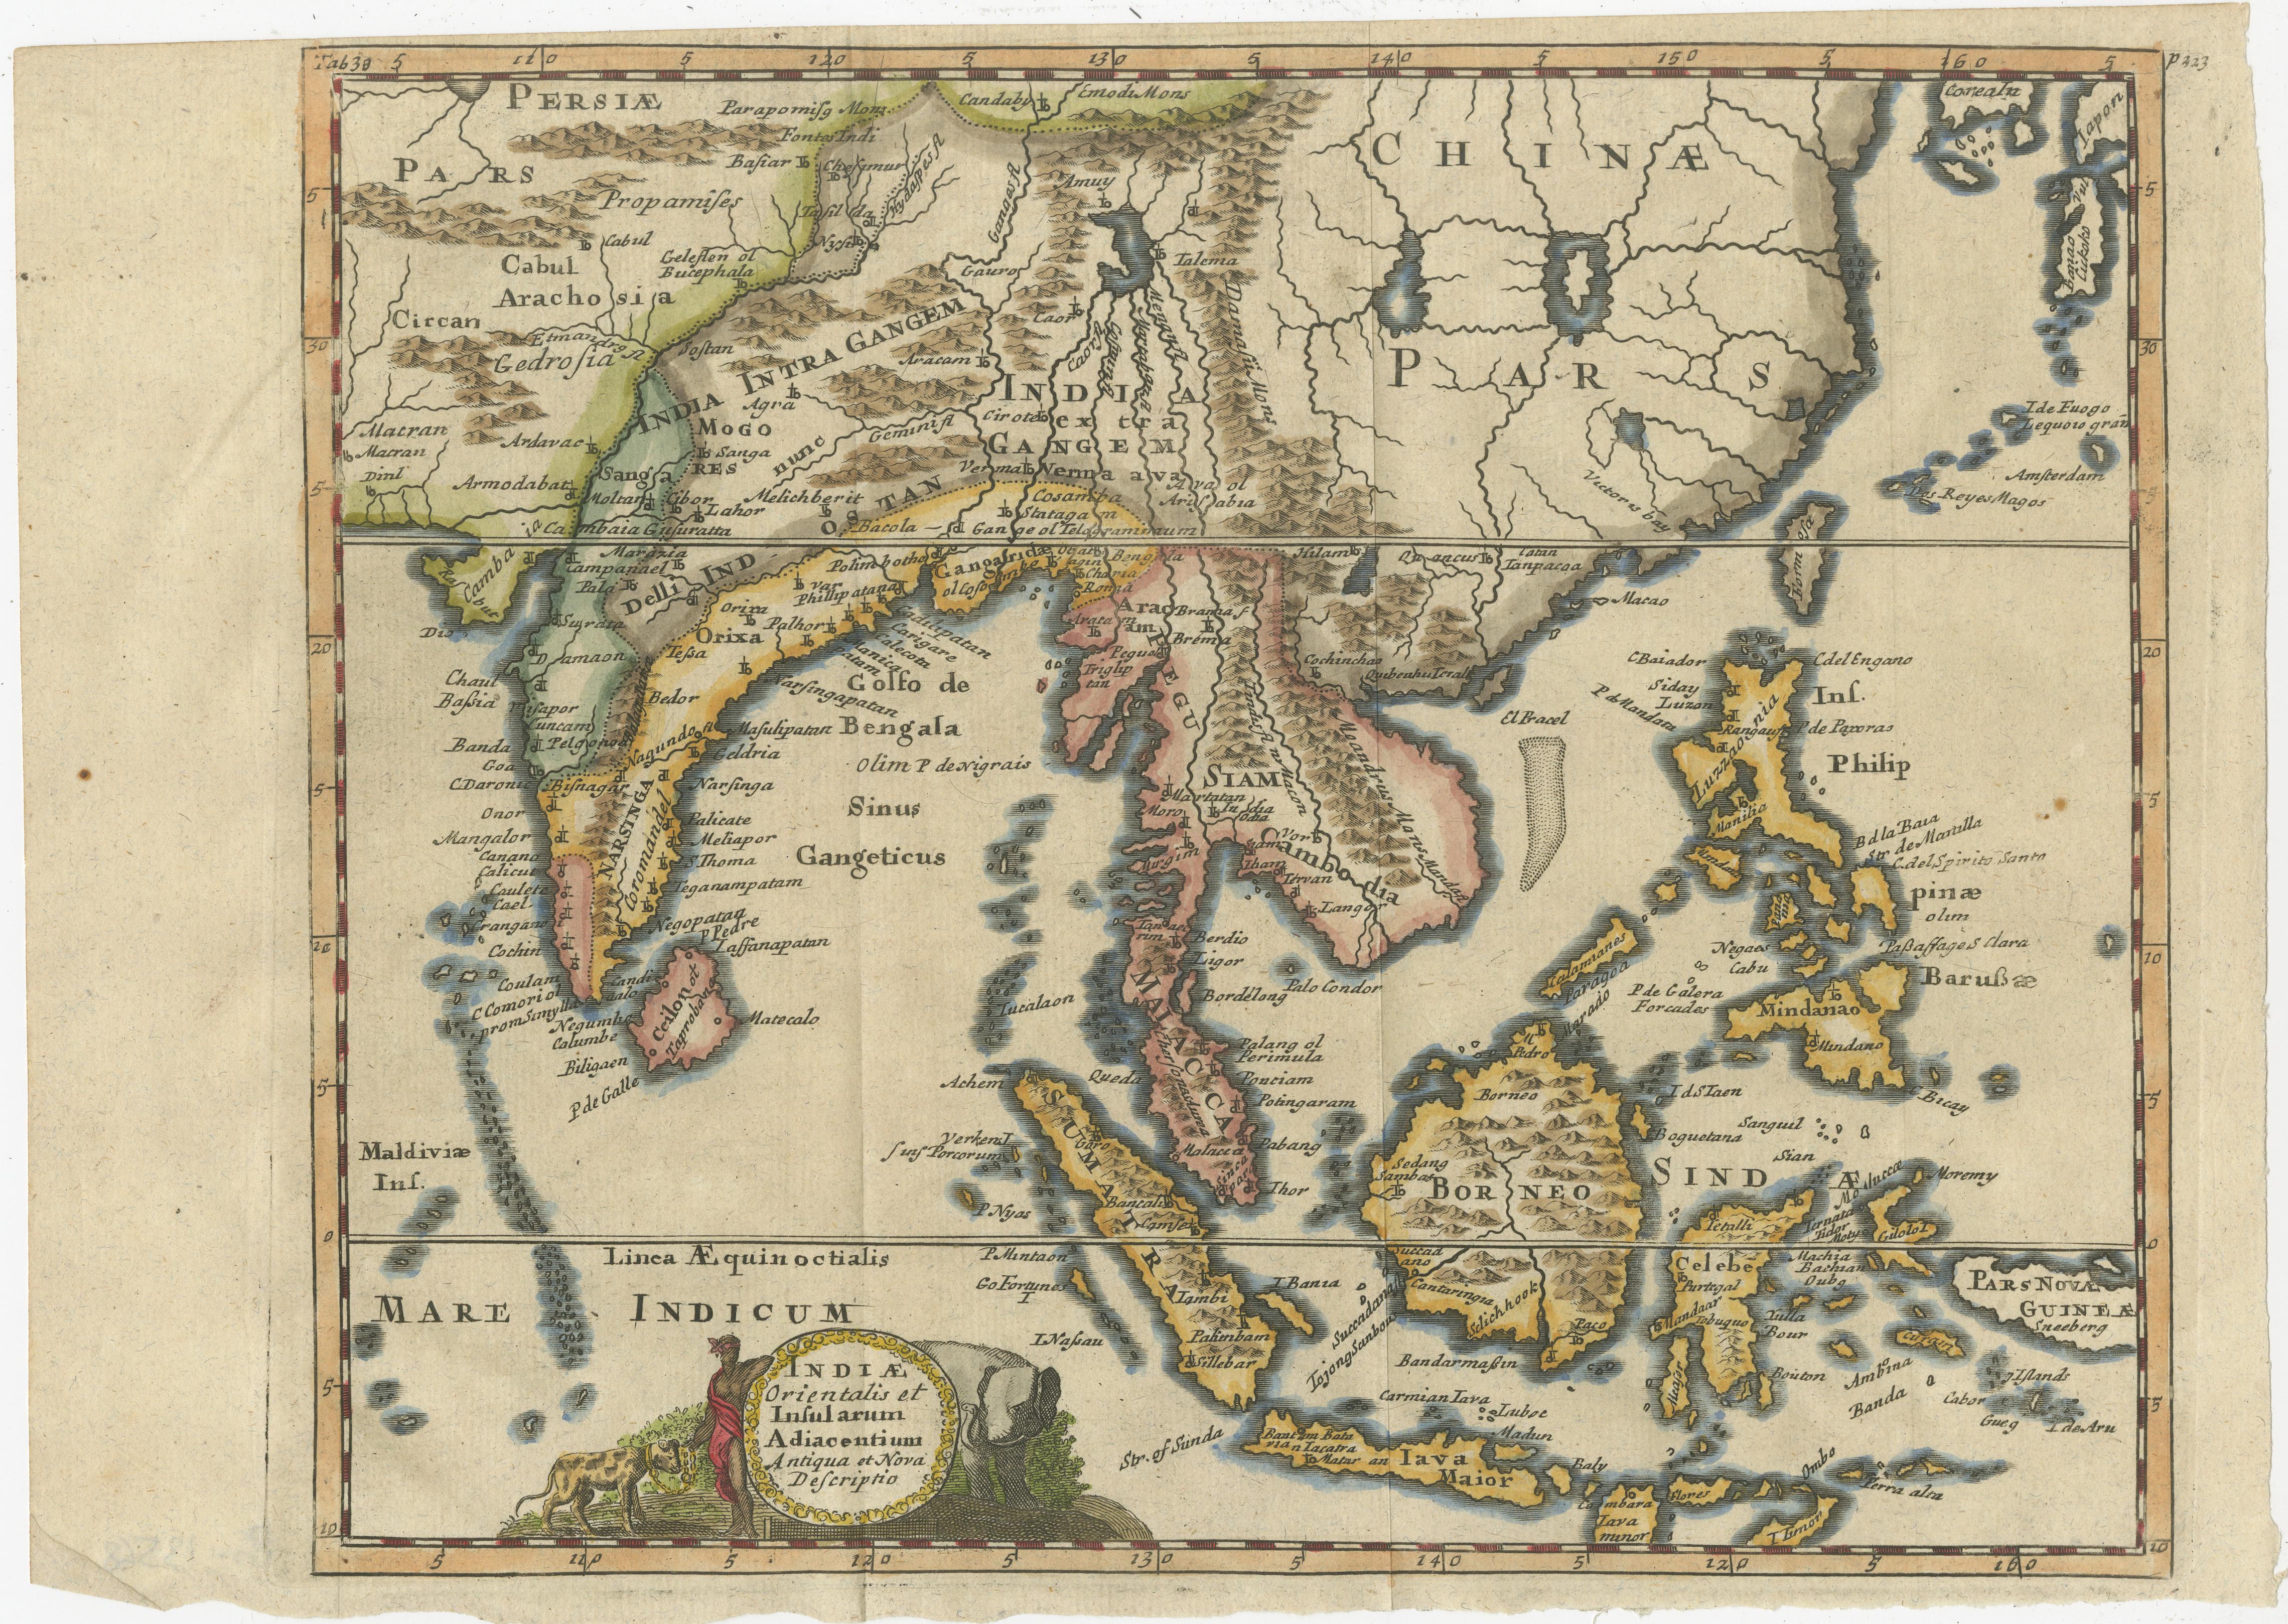 Antique map titled 'Indiae Orientalis et Insularum Adiacentium'. Decorative map of Southeast Asia, China, Philippines, and India. A native holds a wild dog or hyena on a chain, while an elephant glares immediately adjacent. The map was published in